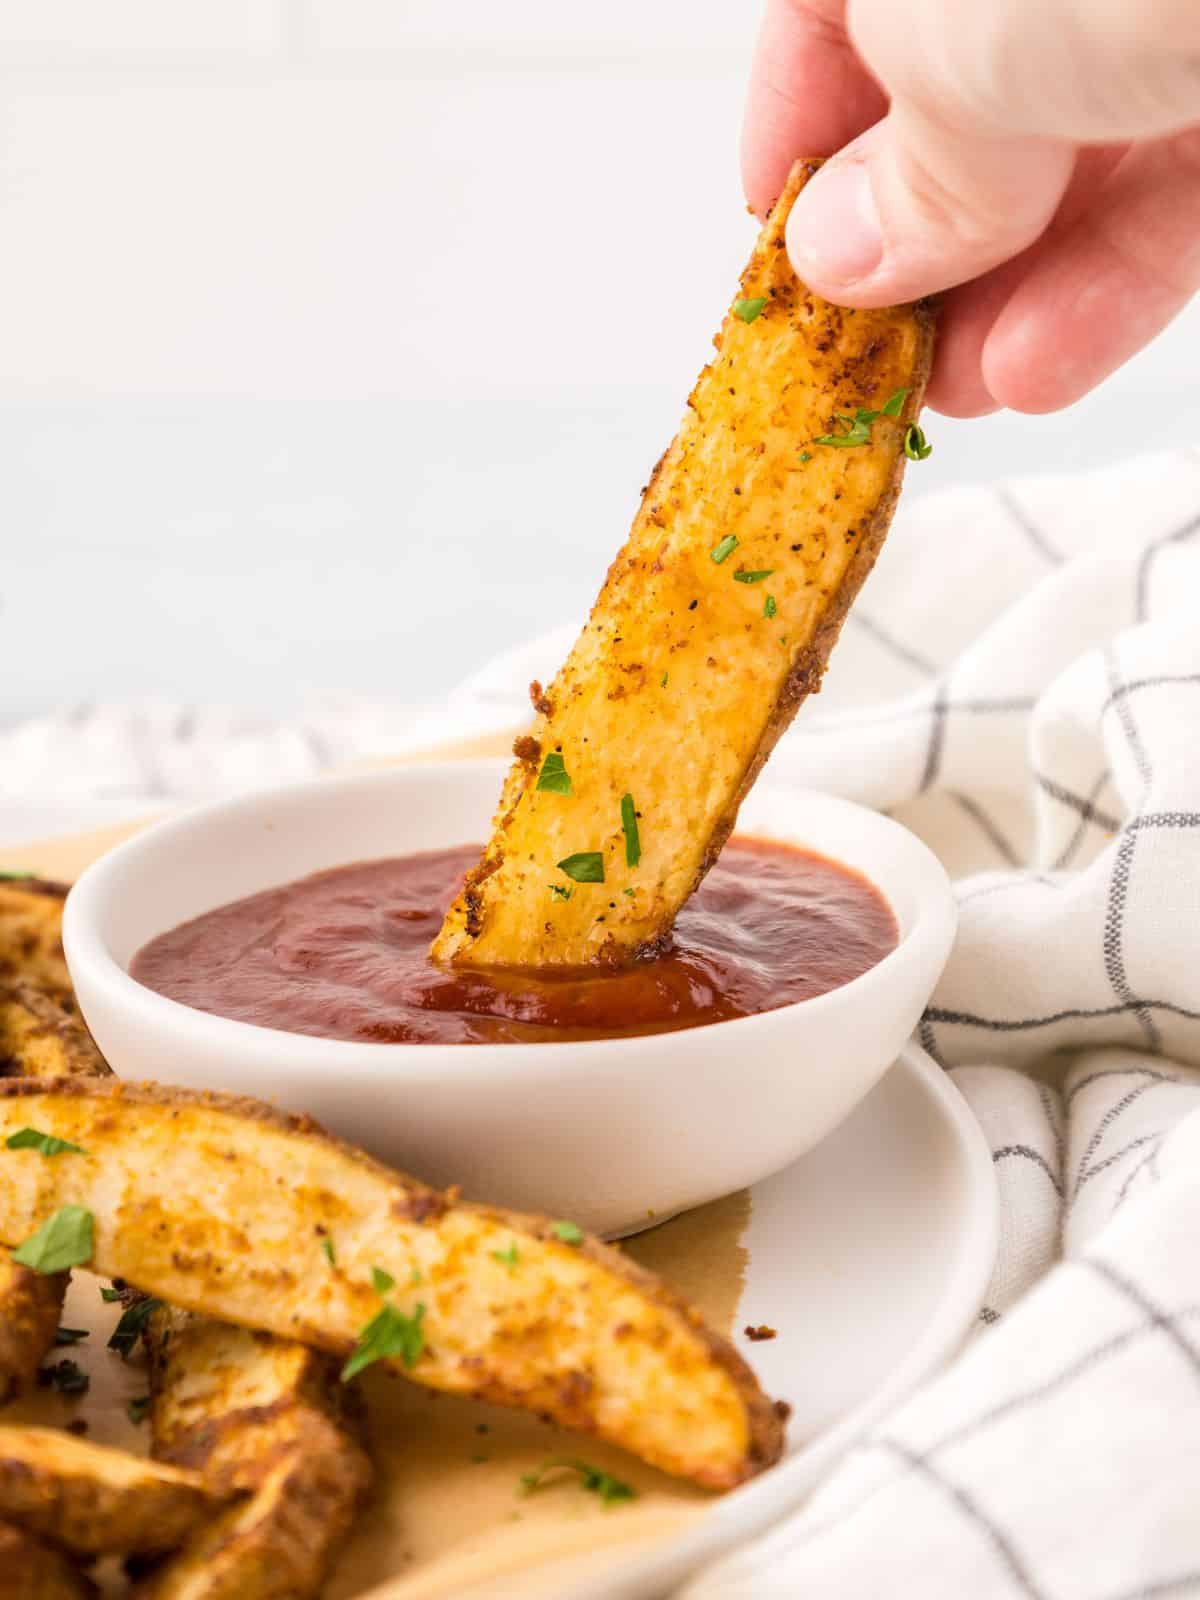 Baked French Fry being dipped into ketchup.